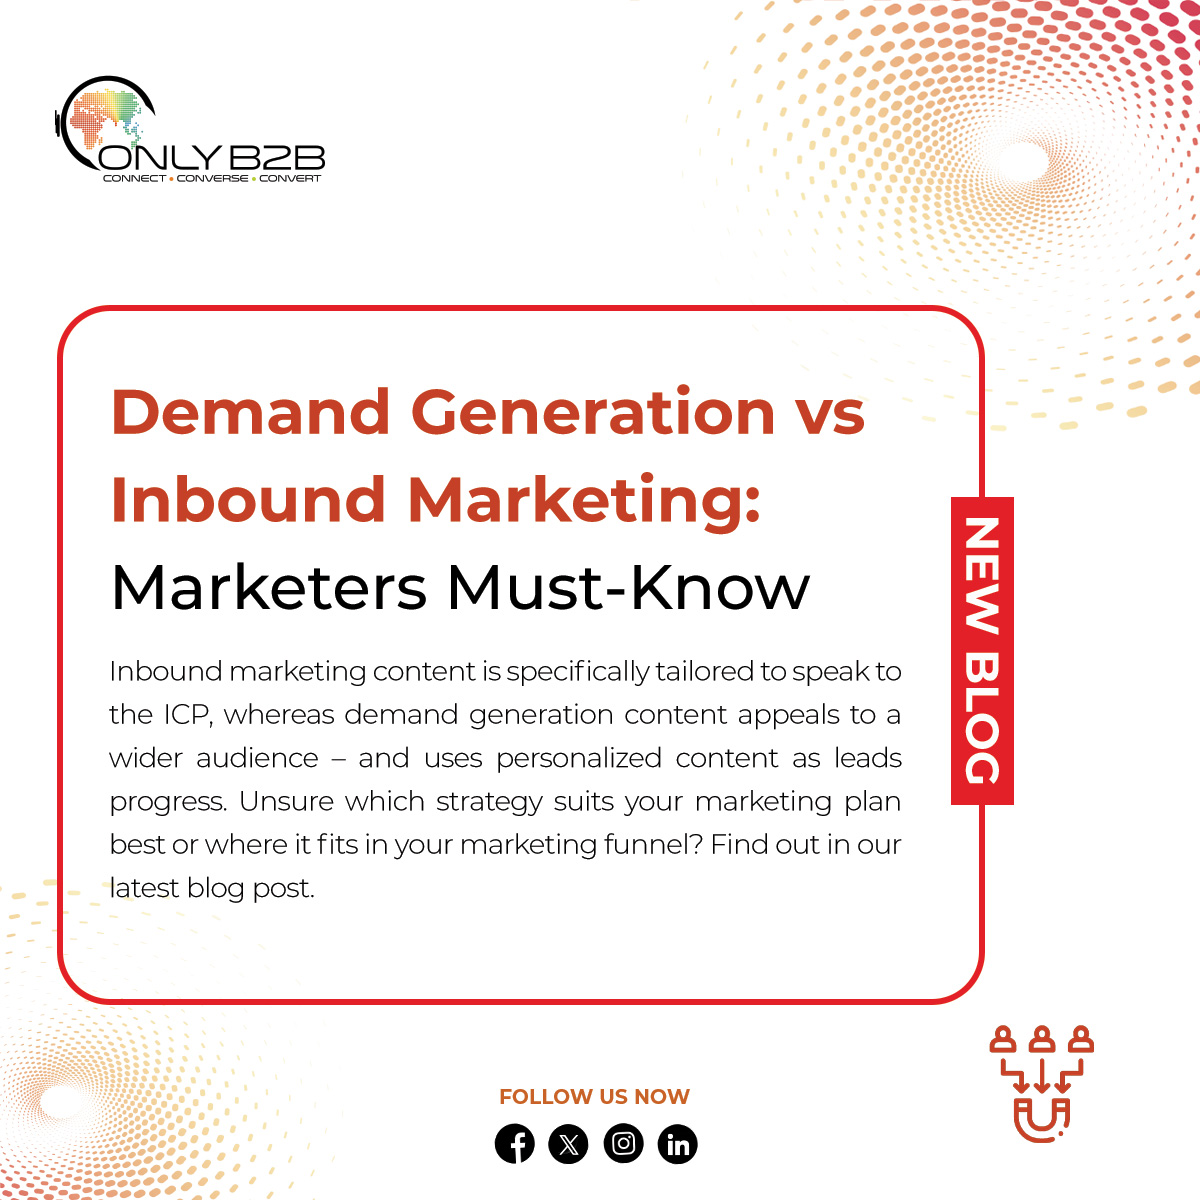 Confused by Demand Gen vs. Inbound Marketing? Don't be! Our blog post clears things up: only-b2b.com/blog/demand-ge… #B2BMarketing #DemandGeneration #OnlyB2B